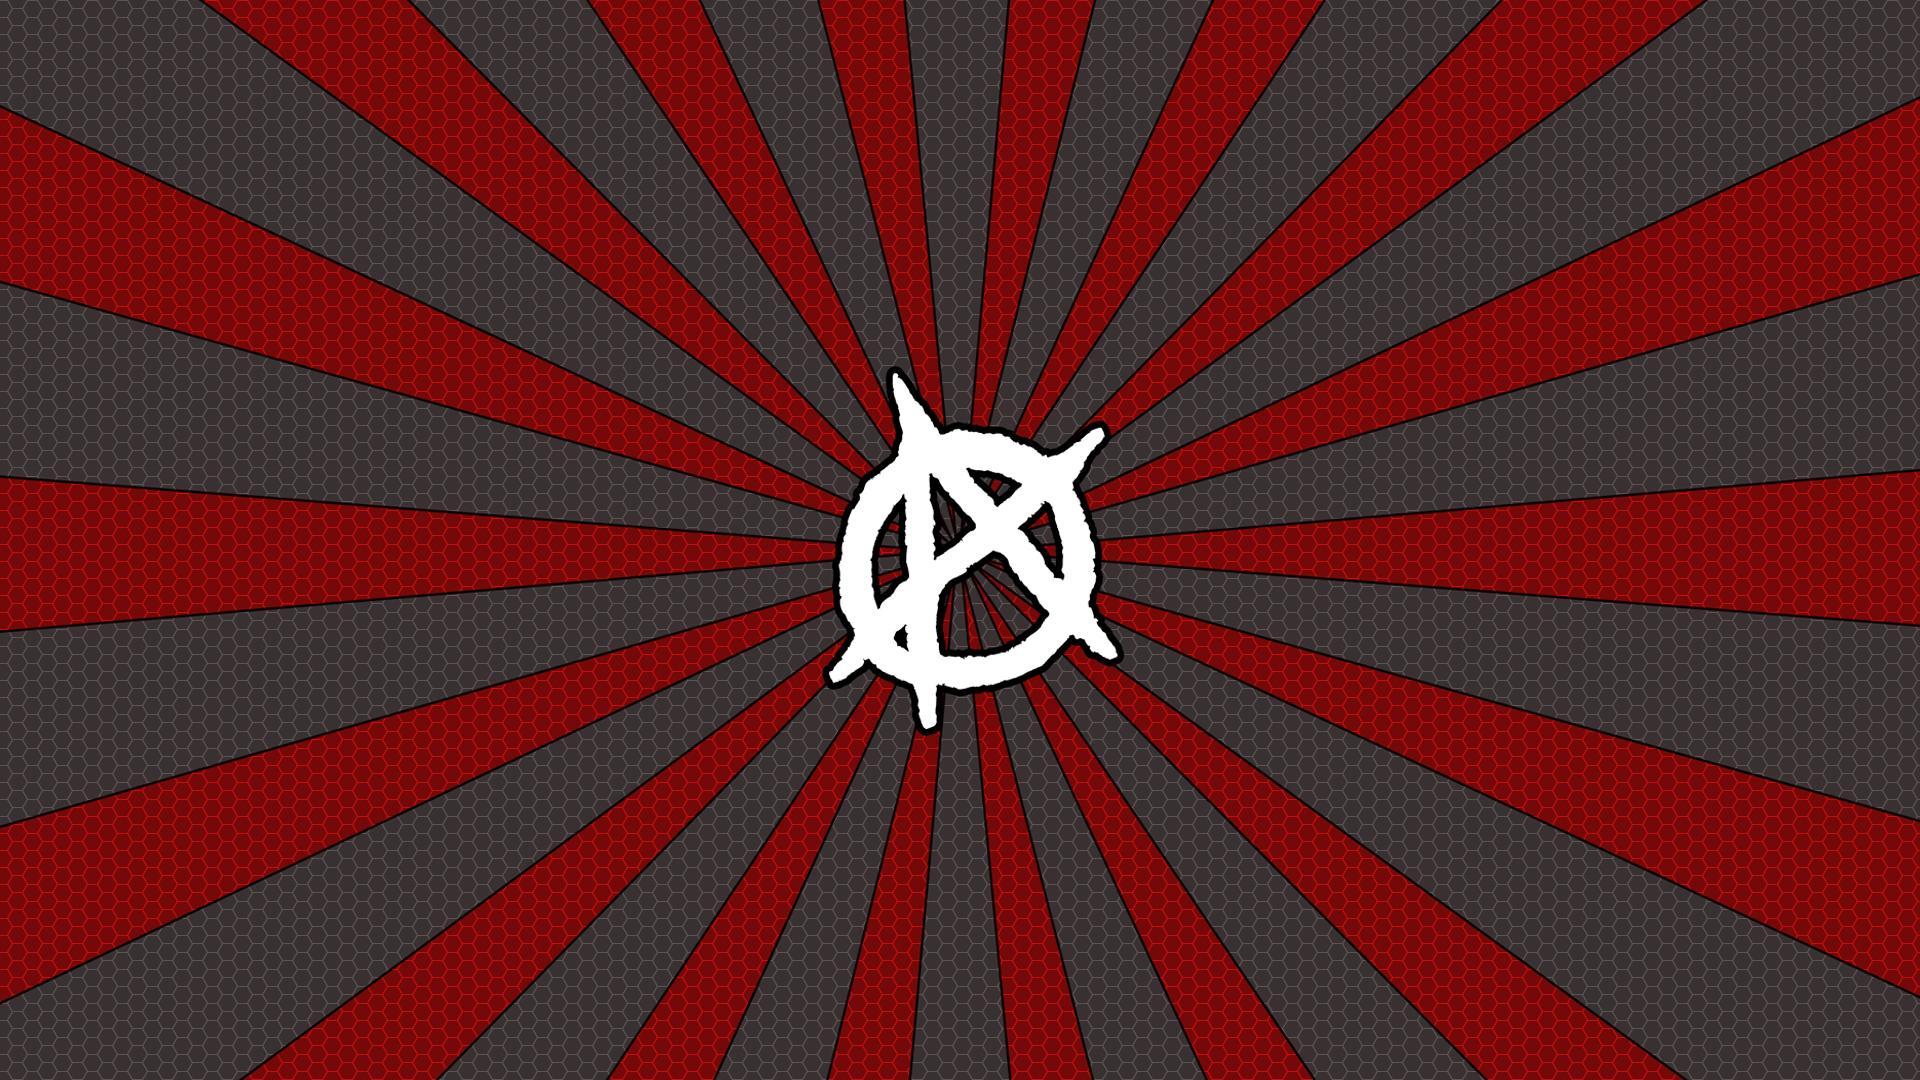 Anarchy Wallpaper Modern by ImTabe on